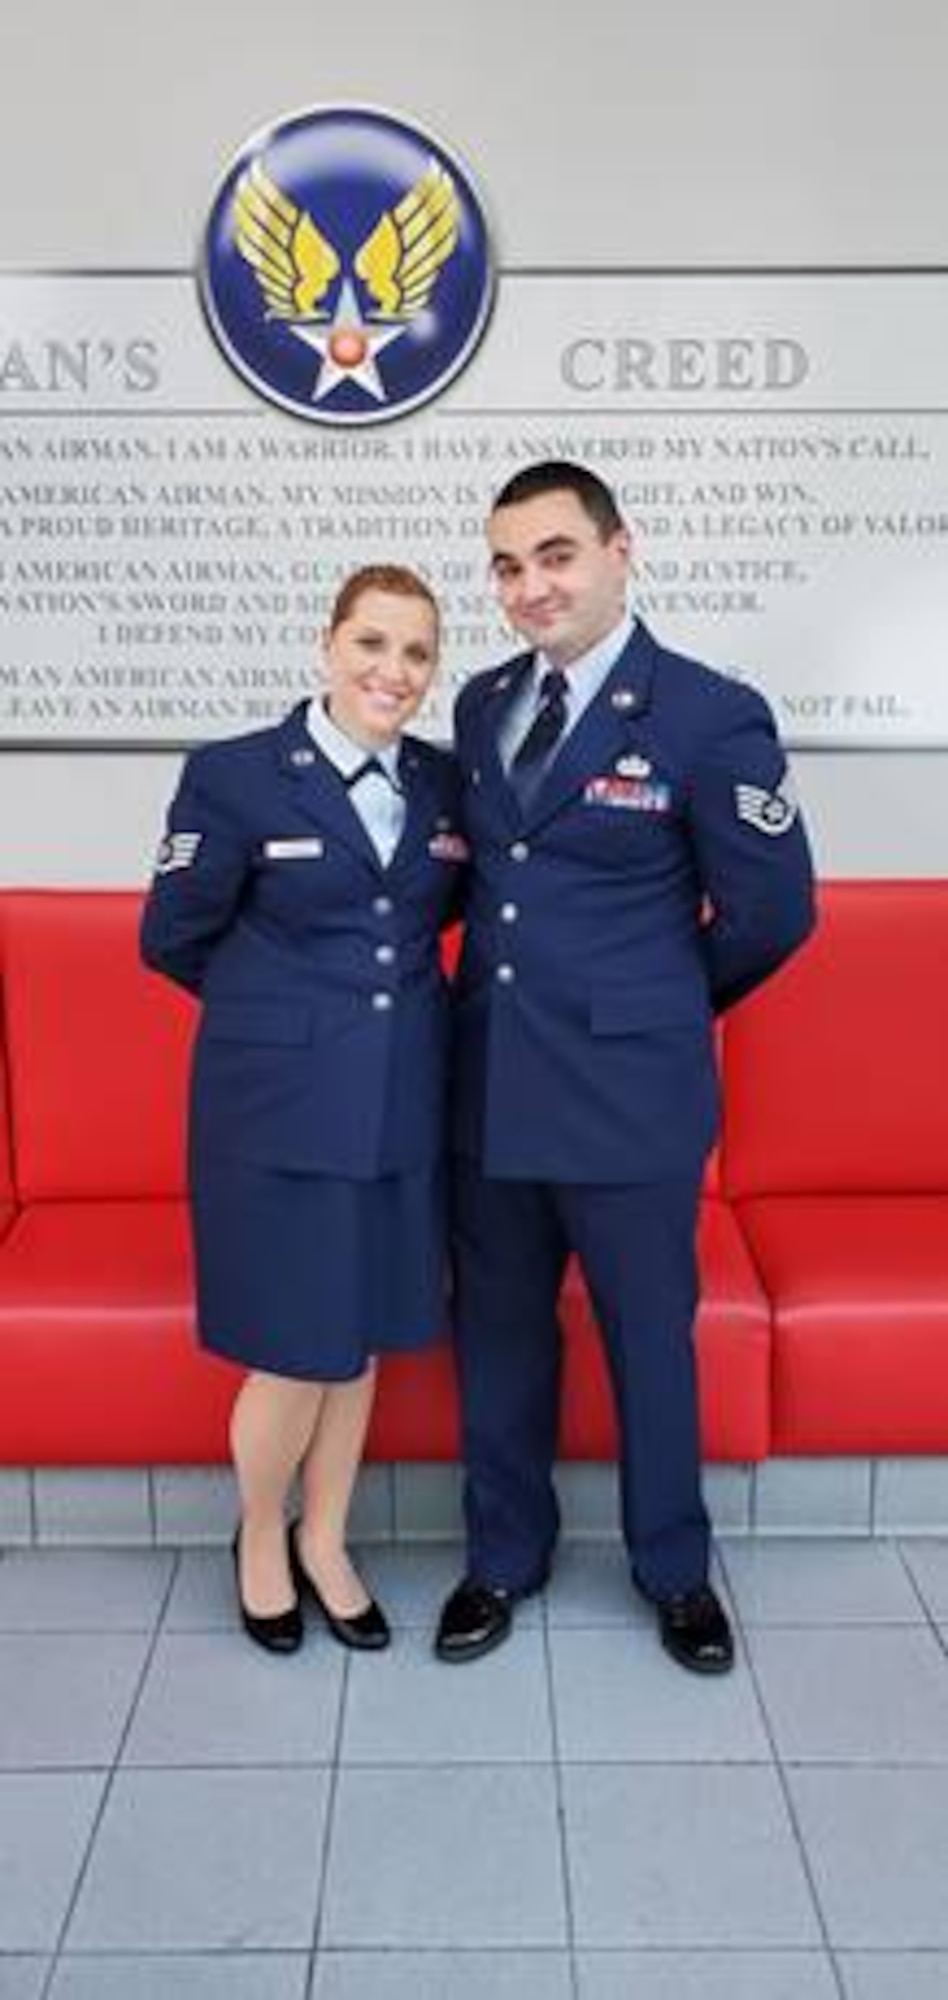 In June, Staff Sgts Cameron and Khrysta Gomula both graduated from the Community College of the Air Force receiving their associate’s degrees in Informations Systems Technology. The Gomula’s are now both working on obtaining their bachelor’s degrees. (Courtesy photo)